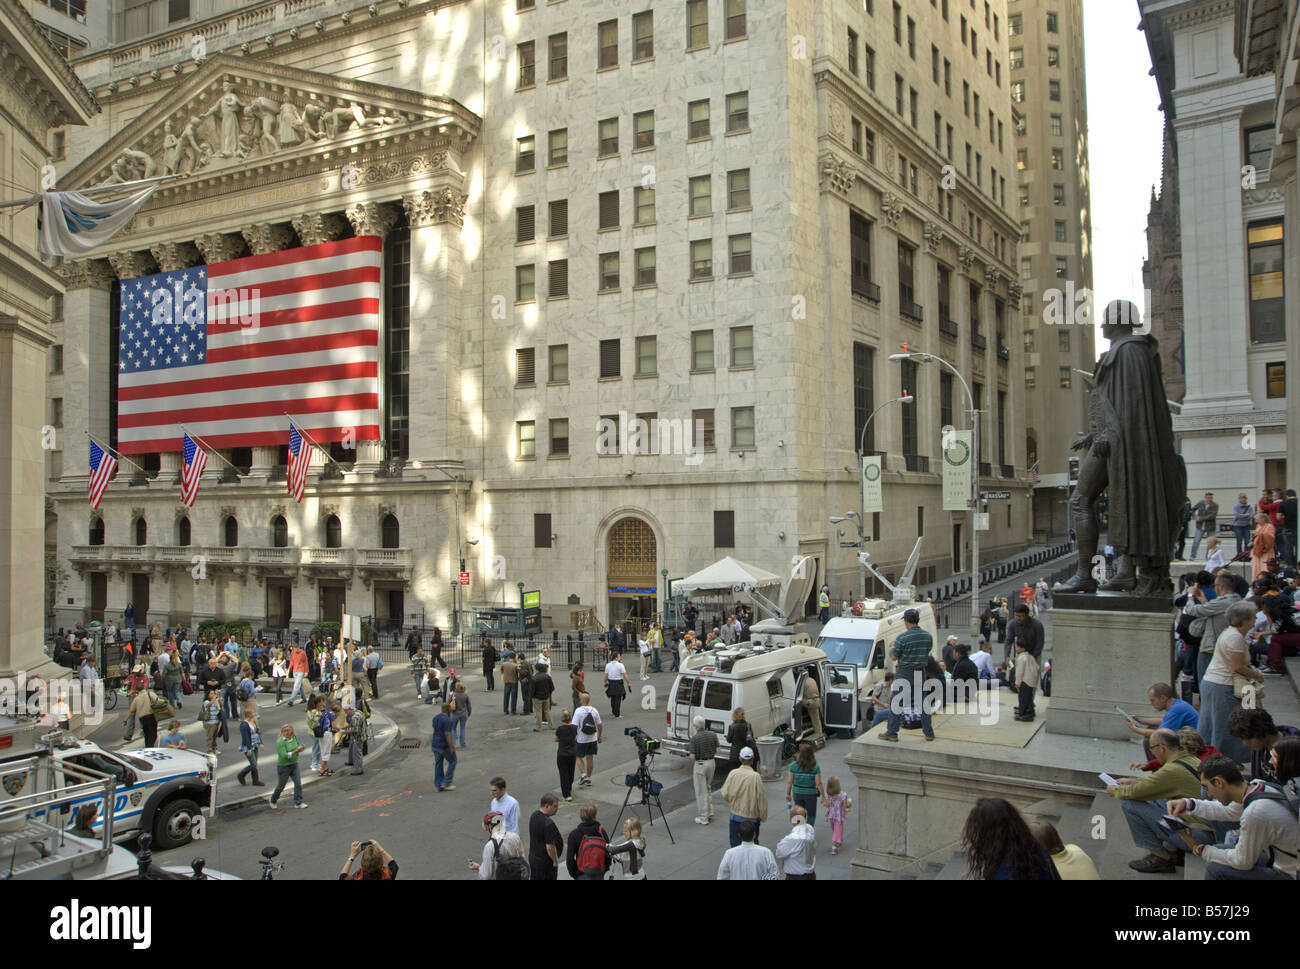 Wall Street, New York, crowded with sightseers & media during the credit crunch financial crisis in 2008 Stock Photo